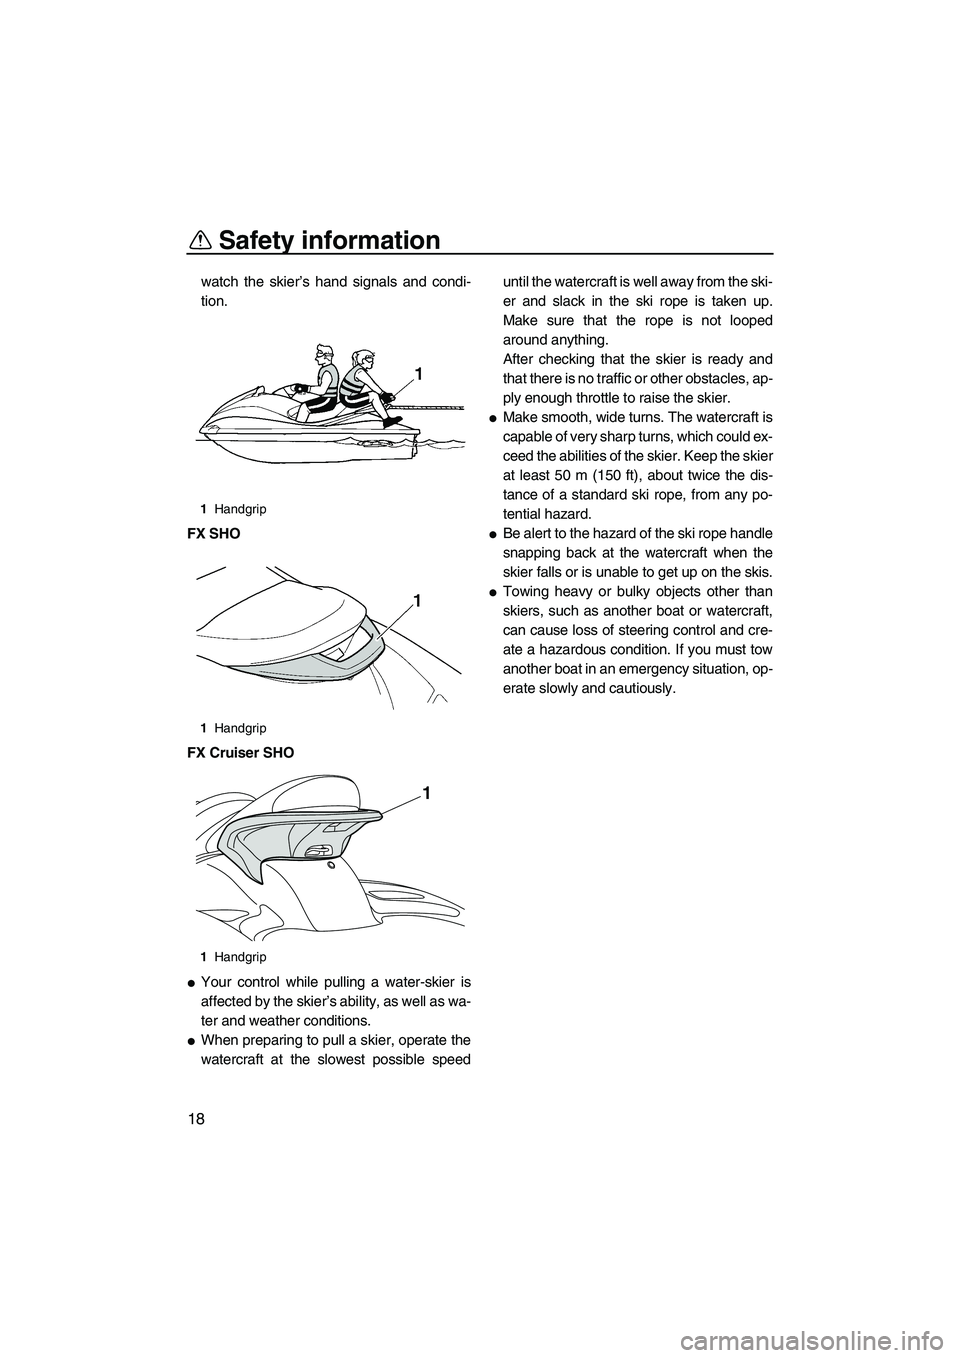 YAMAHA SVHO 2011  Owners Manual Safety information
18
watch the skier’s hand signals and condi-
tion.
FX SHO
FX Cruiser SHO
Your control while pulling a water-skier is
affected by the skier’s ability, as well as wa-
ter and wea